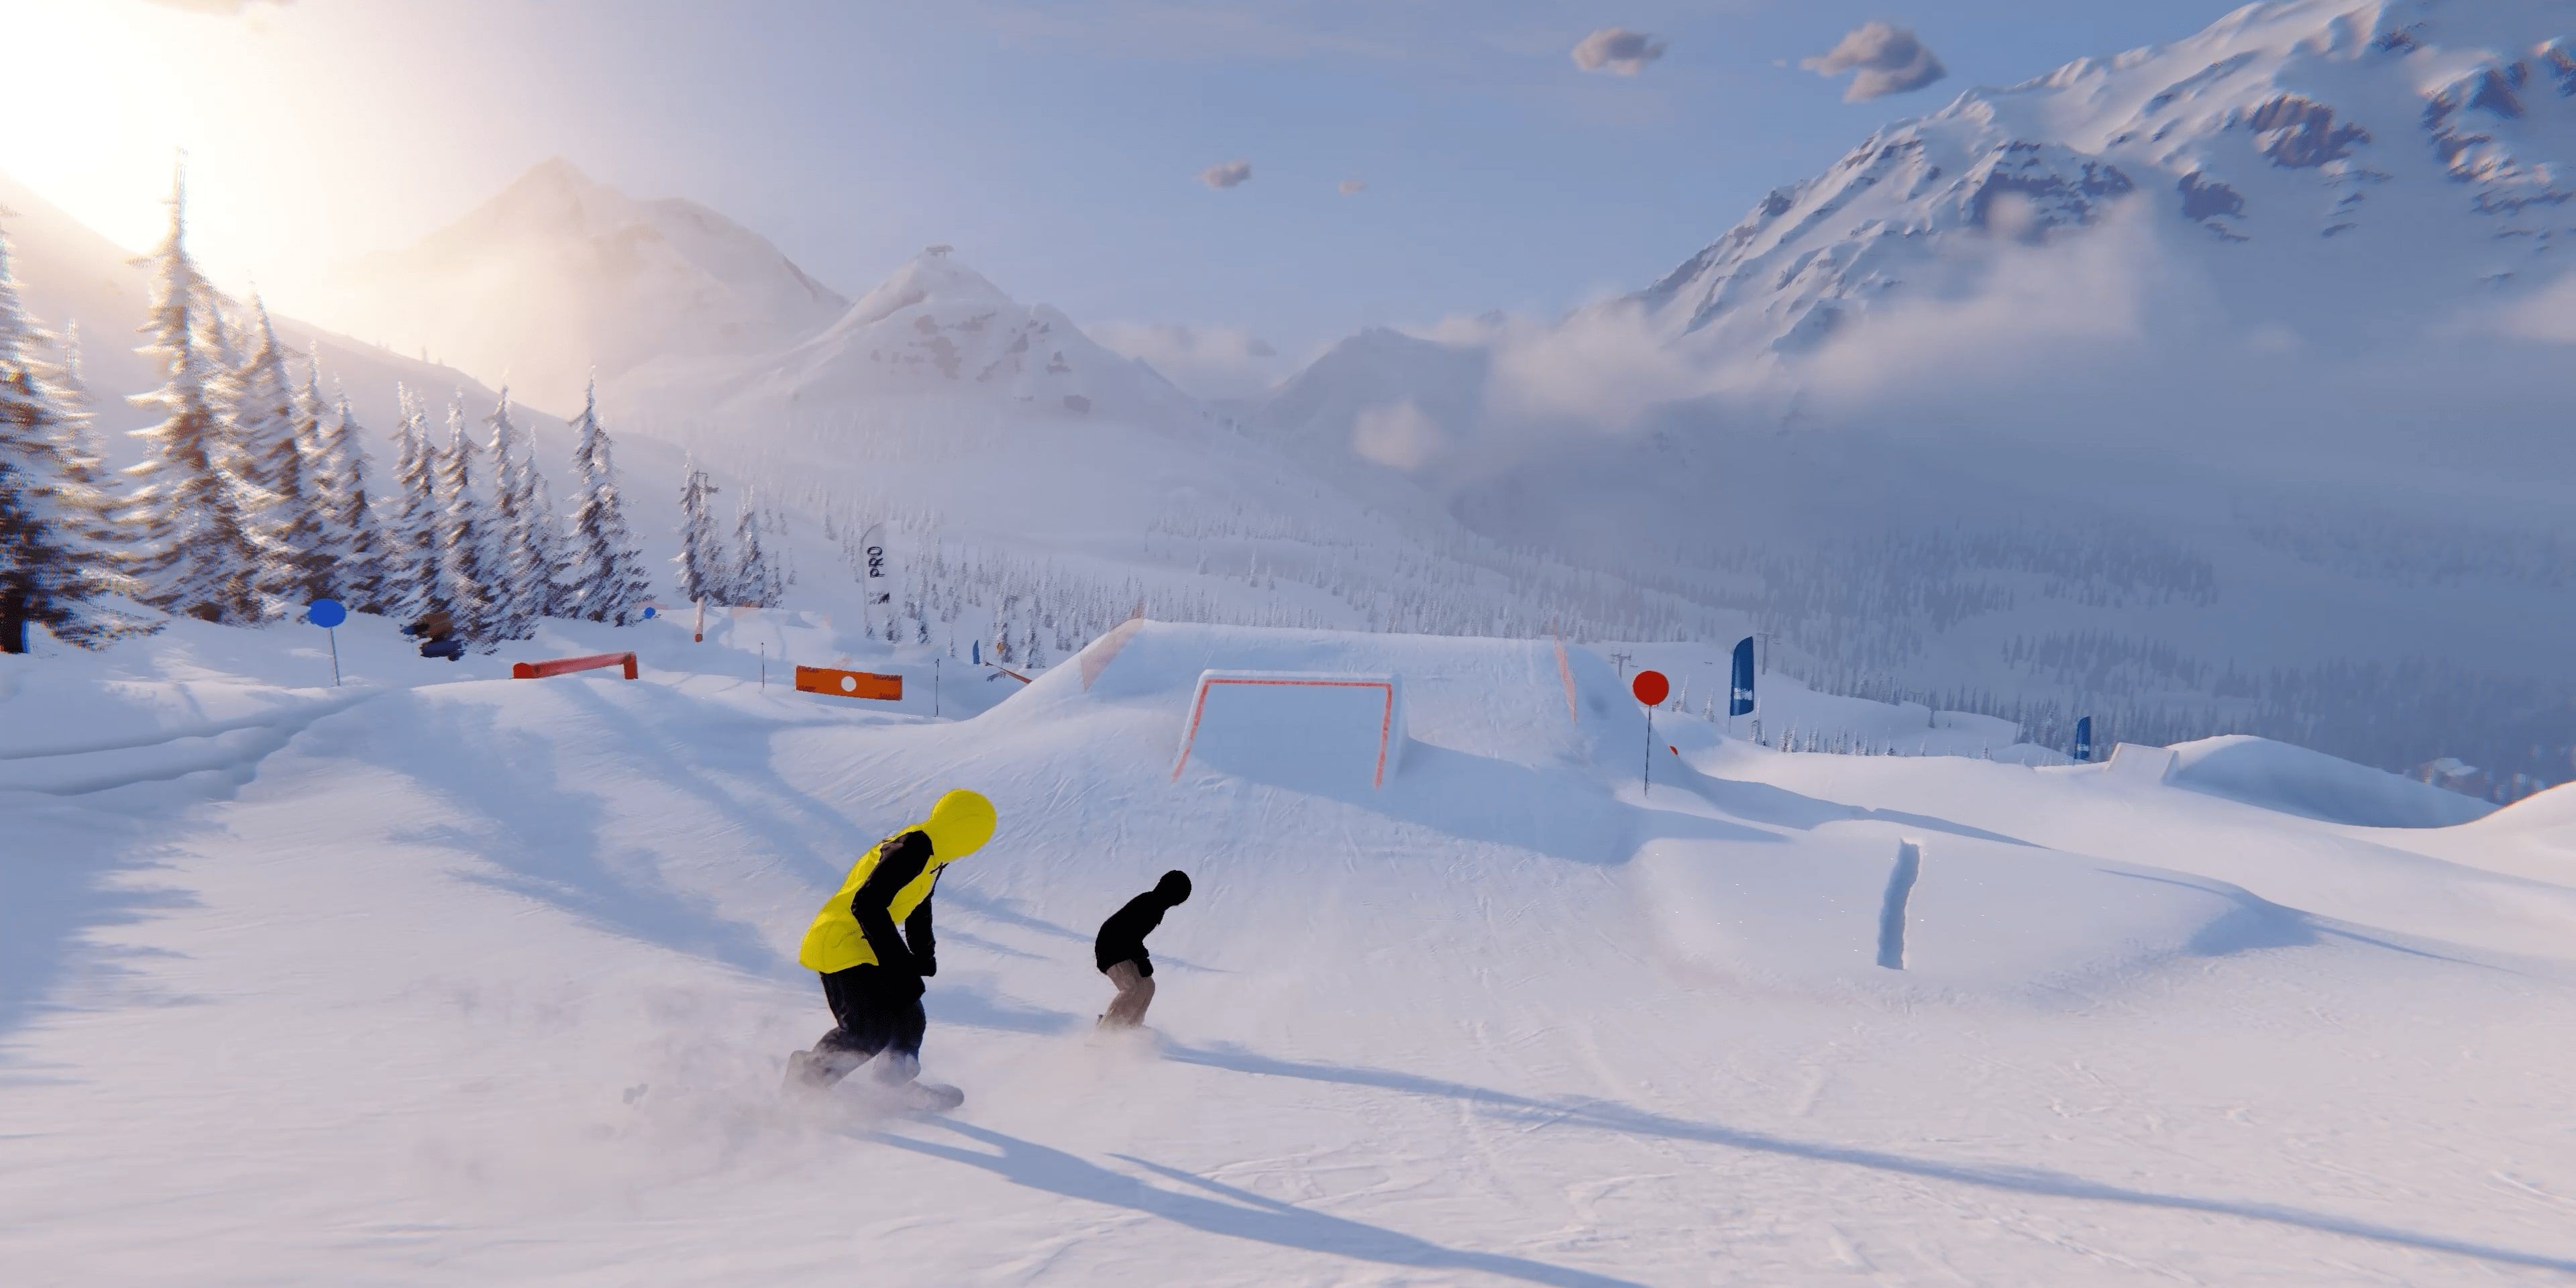 image from the game Shredders showing people snowboarding in a snowy area